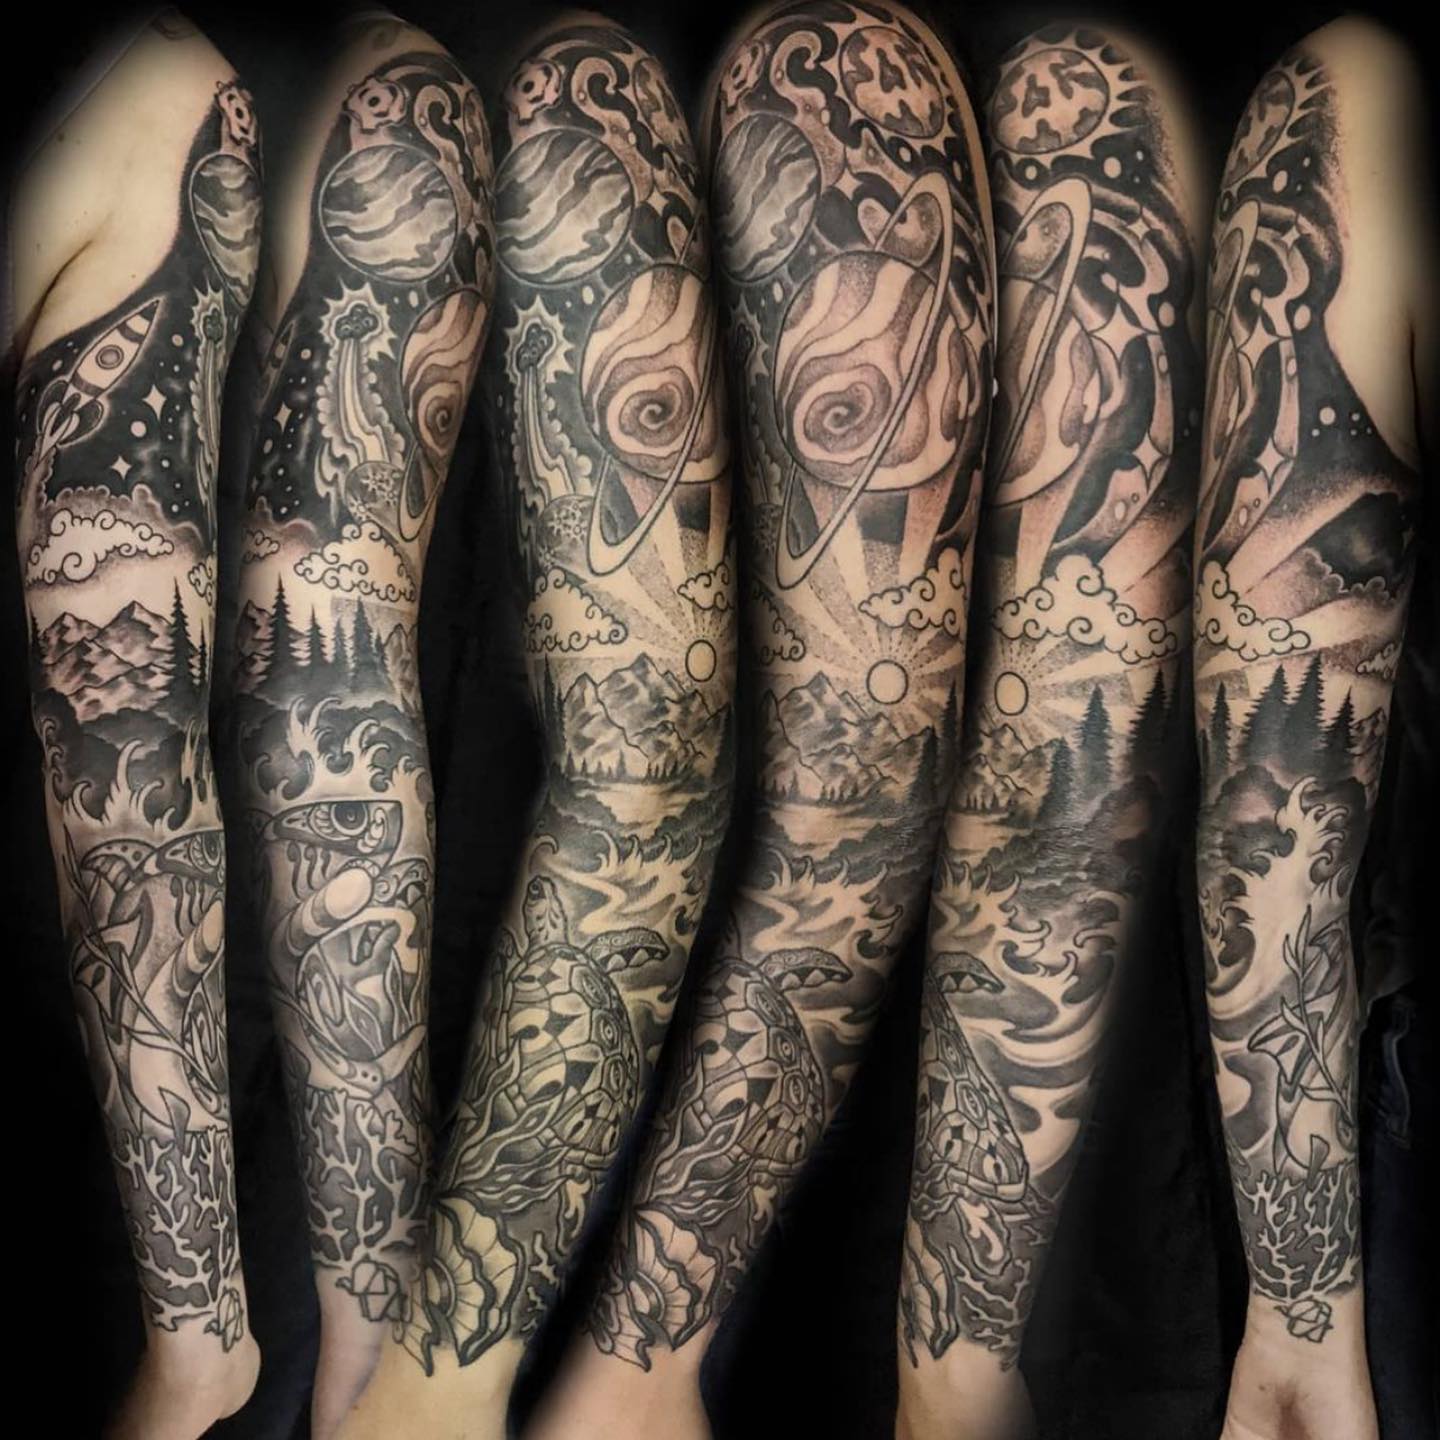 𝕽𝖎𝖙𝖚𝖆𝖑 𝕿𝖆𝖙𝖙𝖔𝖔 ritualtattoogallery  Instagram photos and  videos